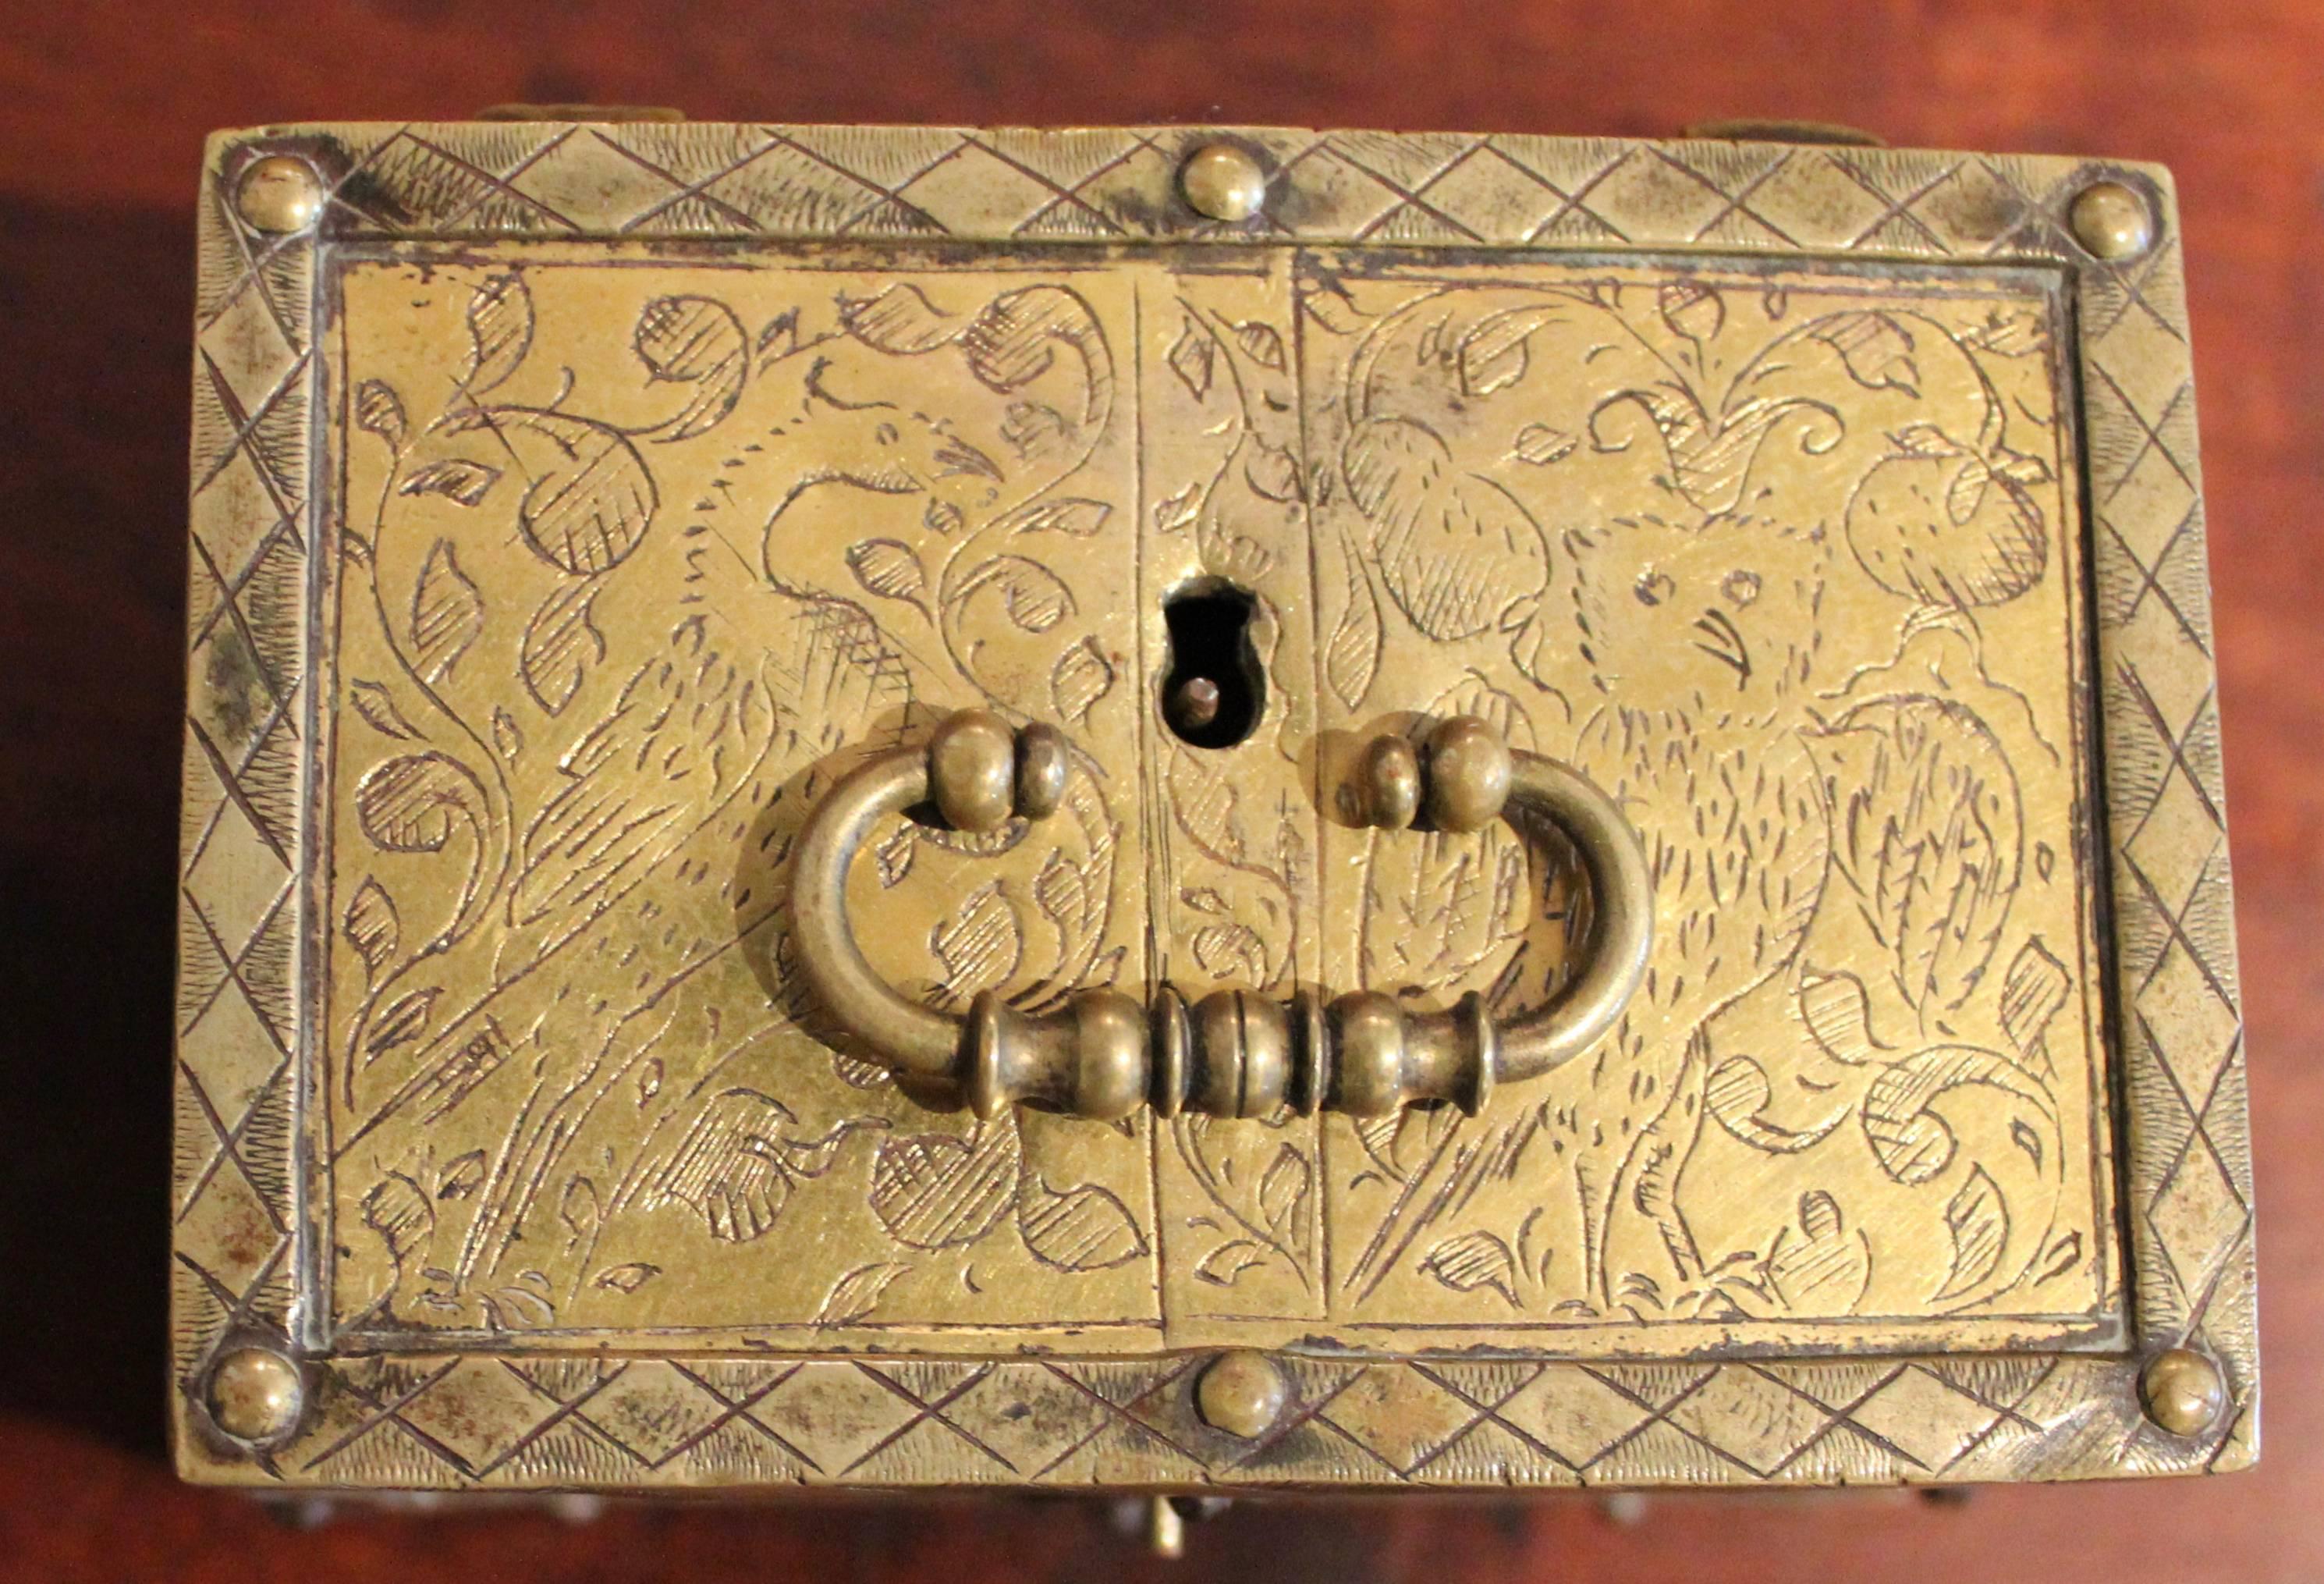 Very rare miniature brass casket. Wonderfully engraved with birds a goat, rabbit and snail with floral designs. His boxes are typically engraved with figures and faces making this one unique.